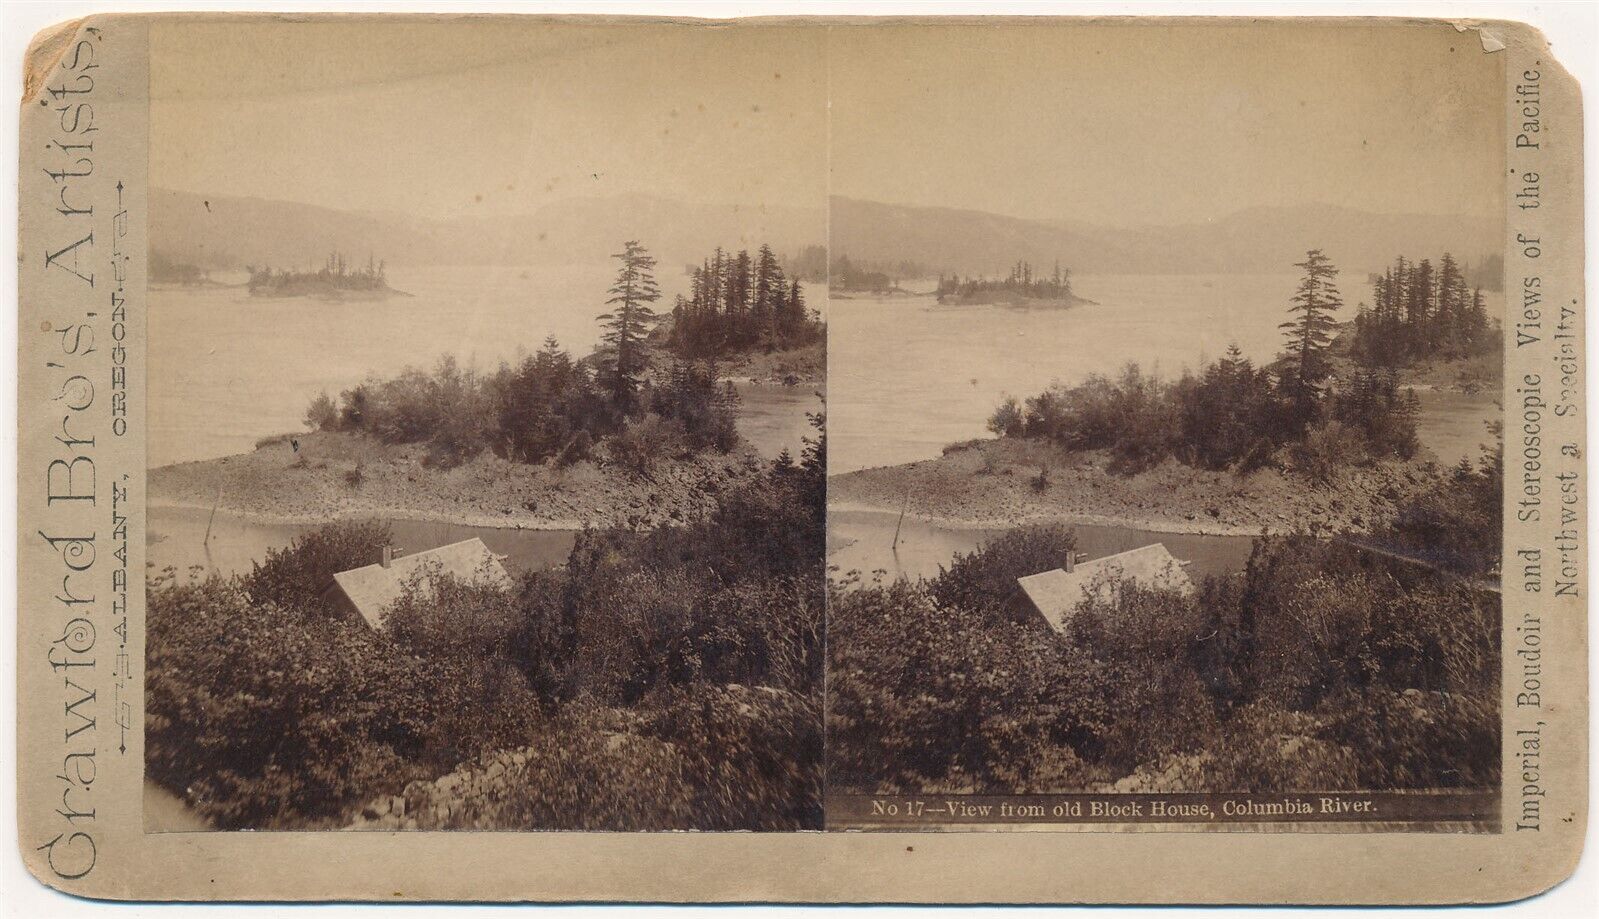 OREGON SV - Columbia River - View from Block House - Crawford 1870s